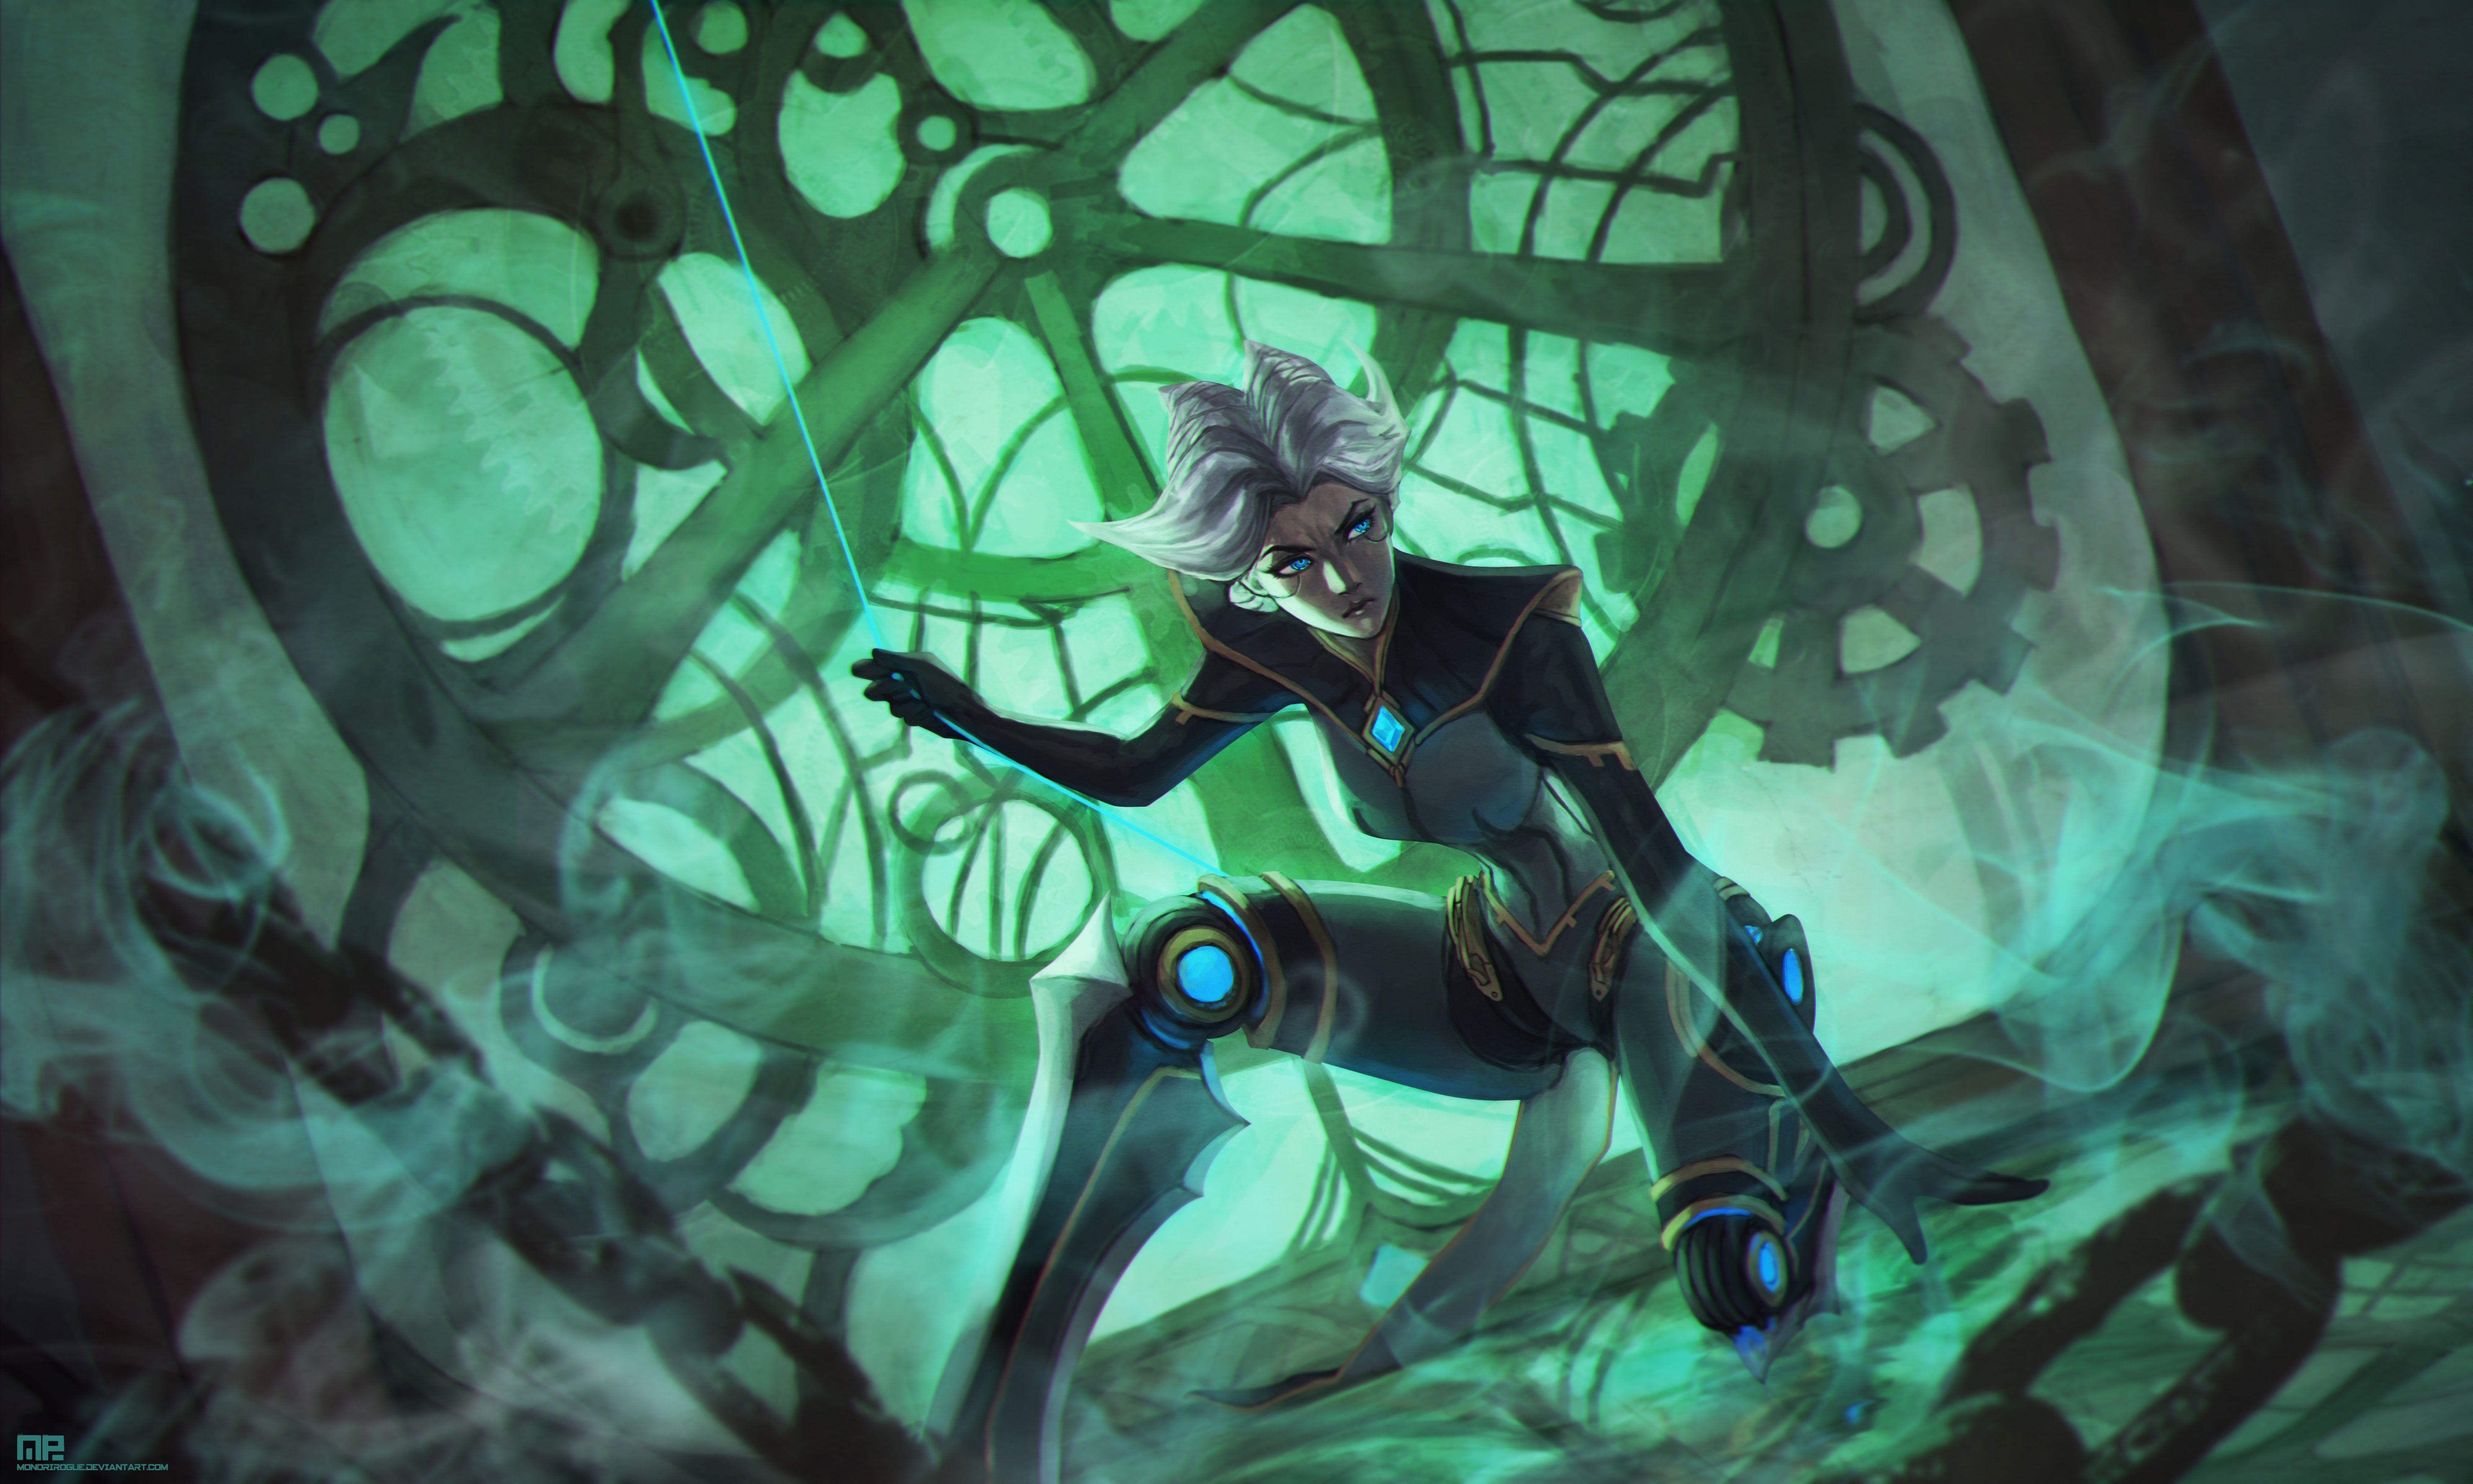 Camille Wallpapers - Wallpaper Cave